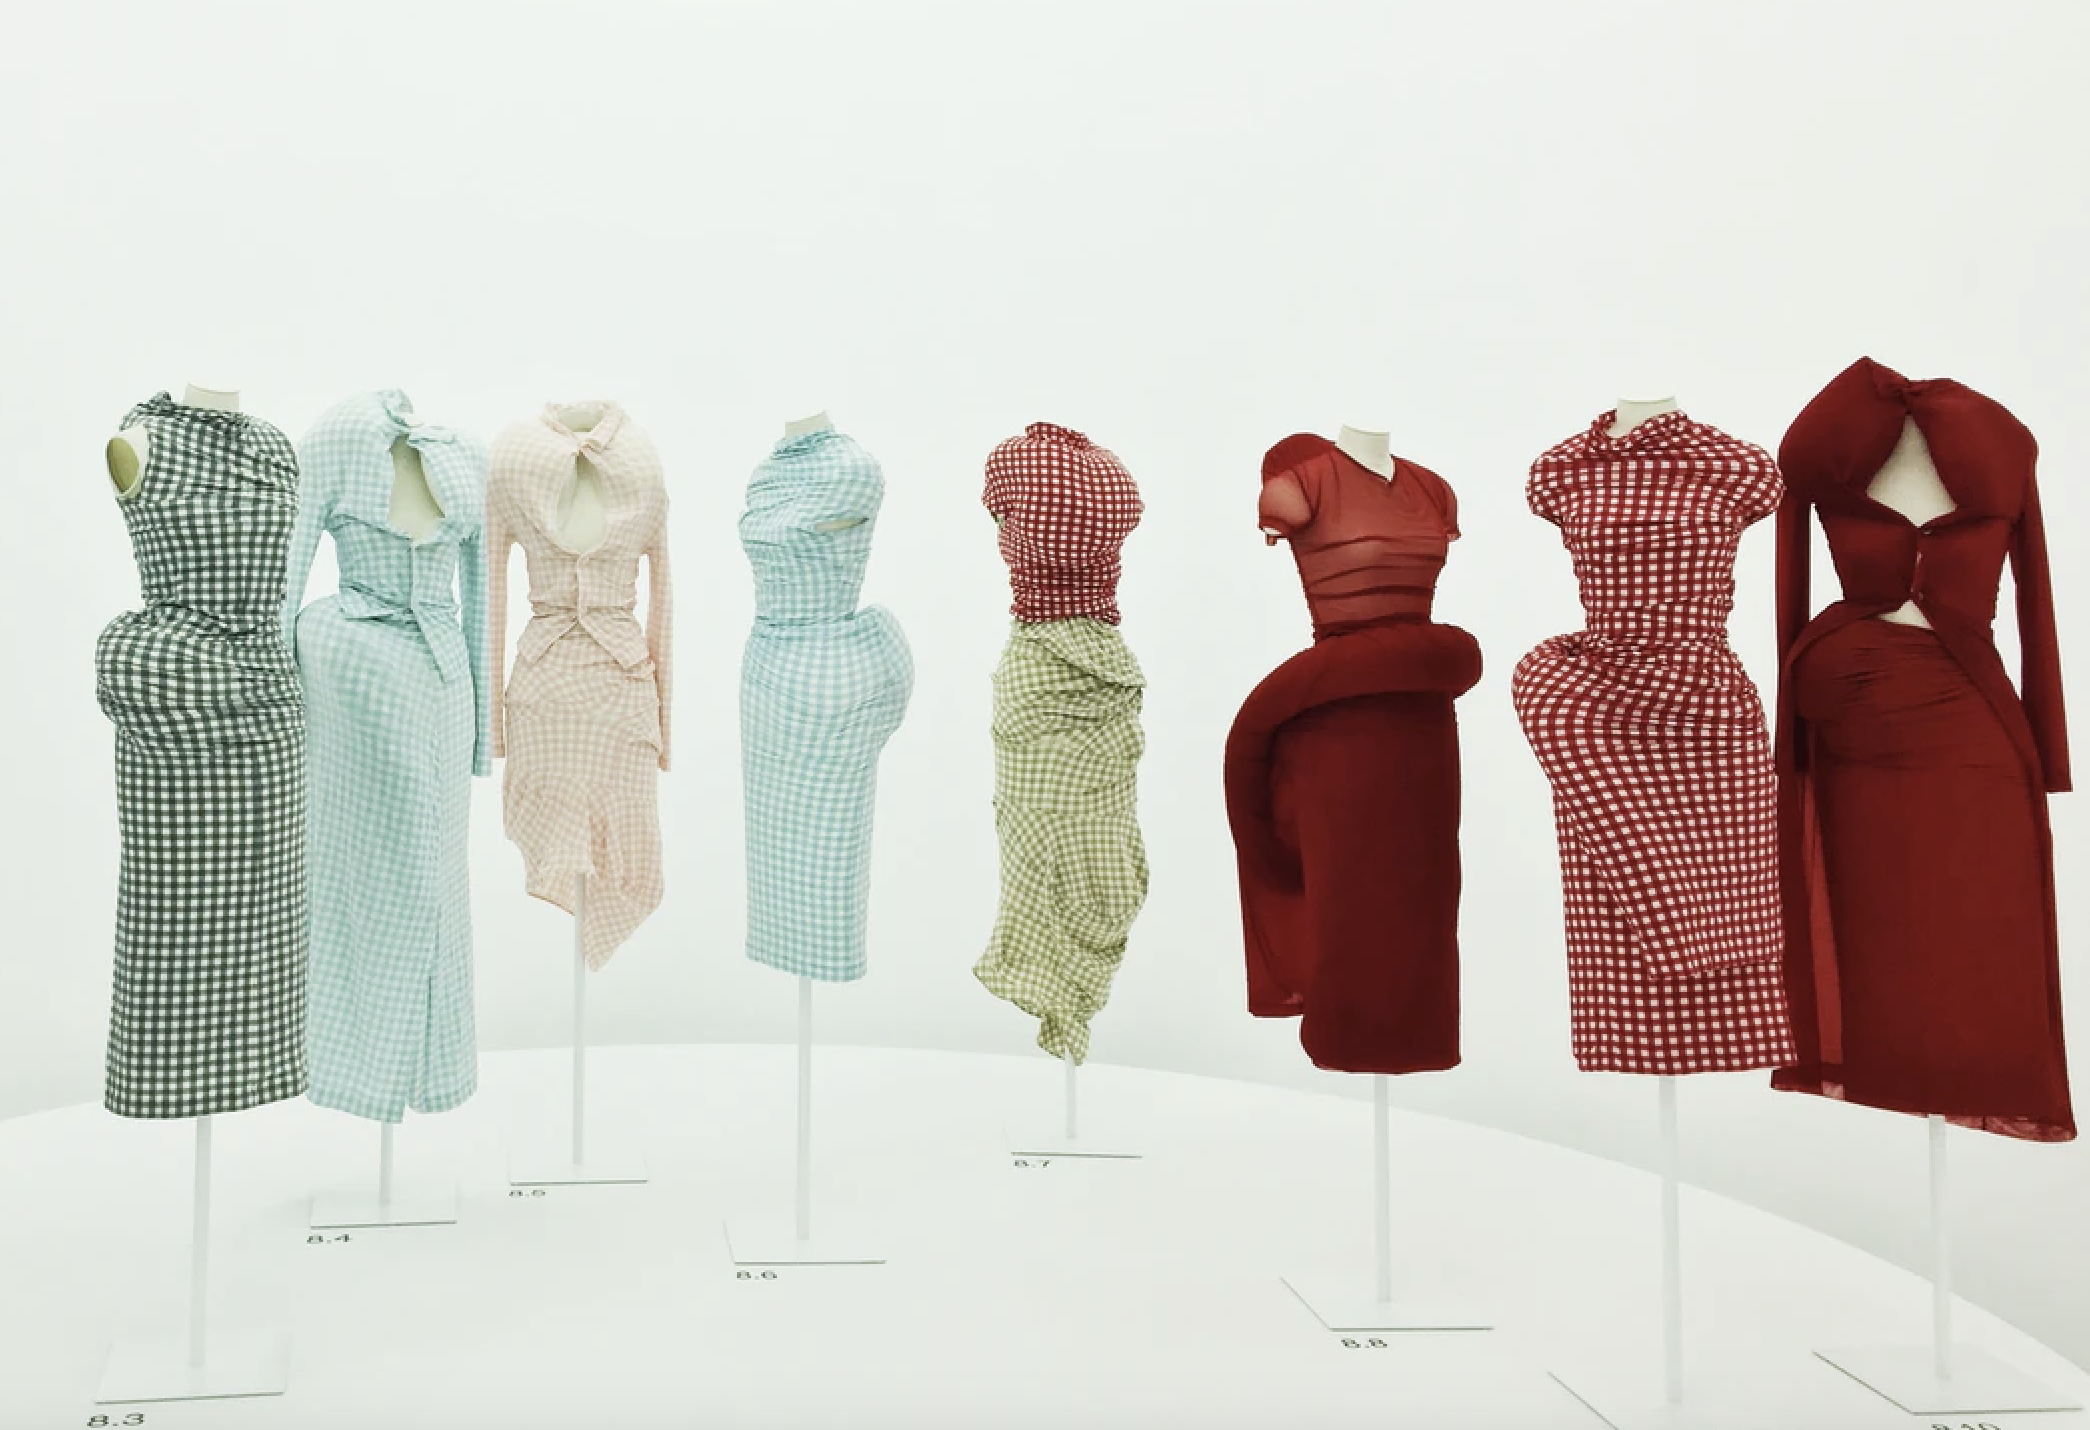 Row of dresses on mannequins